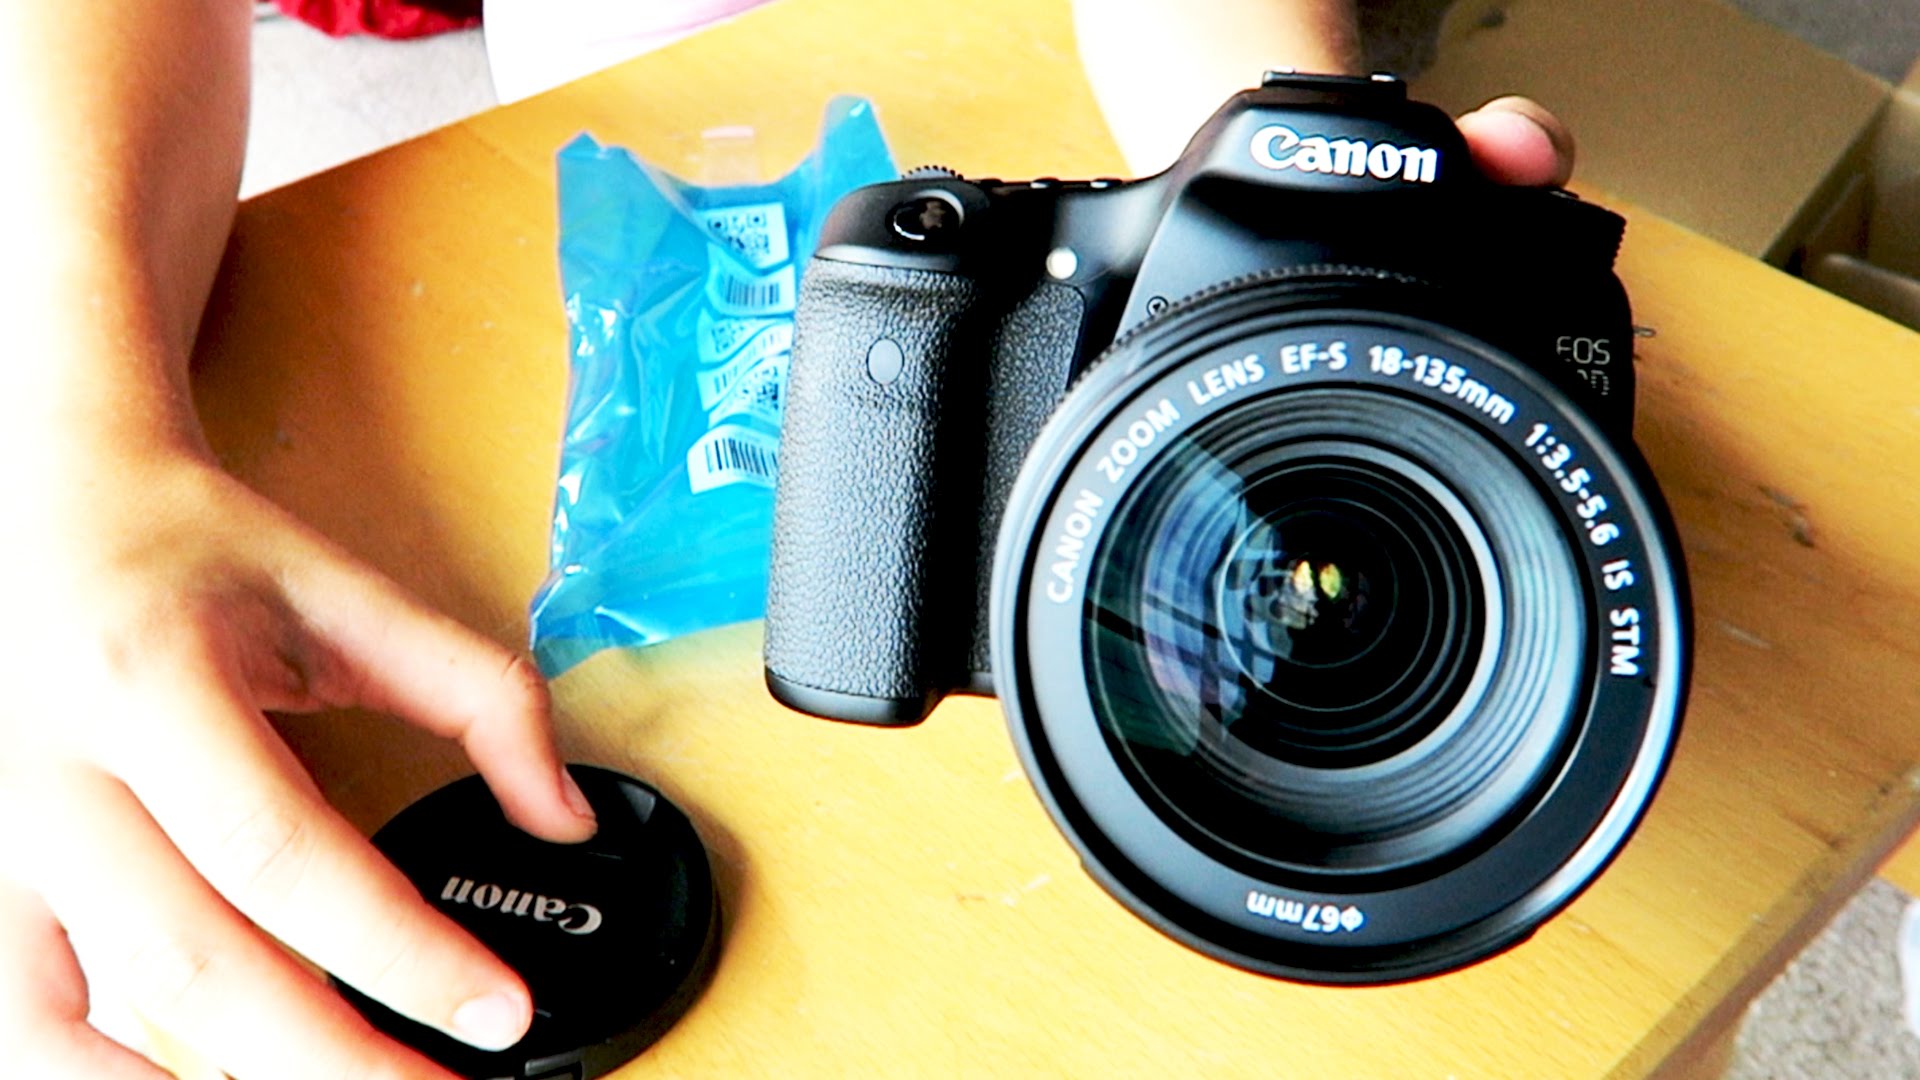 Casey Neistat’s Camera! // Canon 70d DSLR video tested and unboxed!